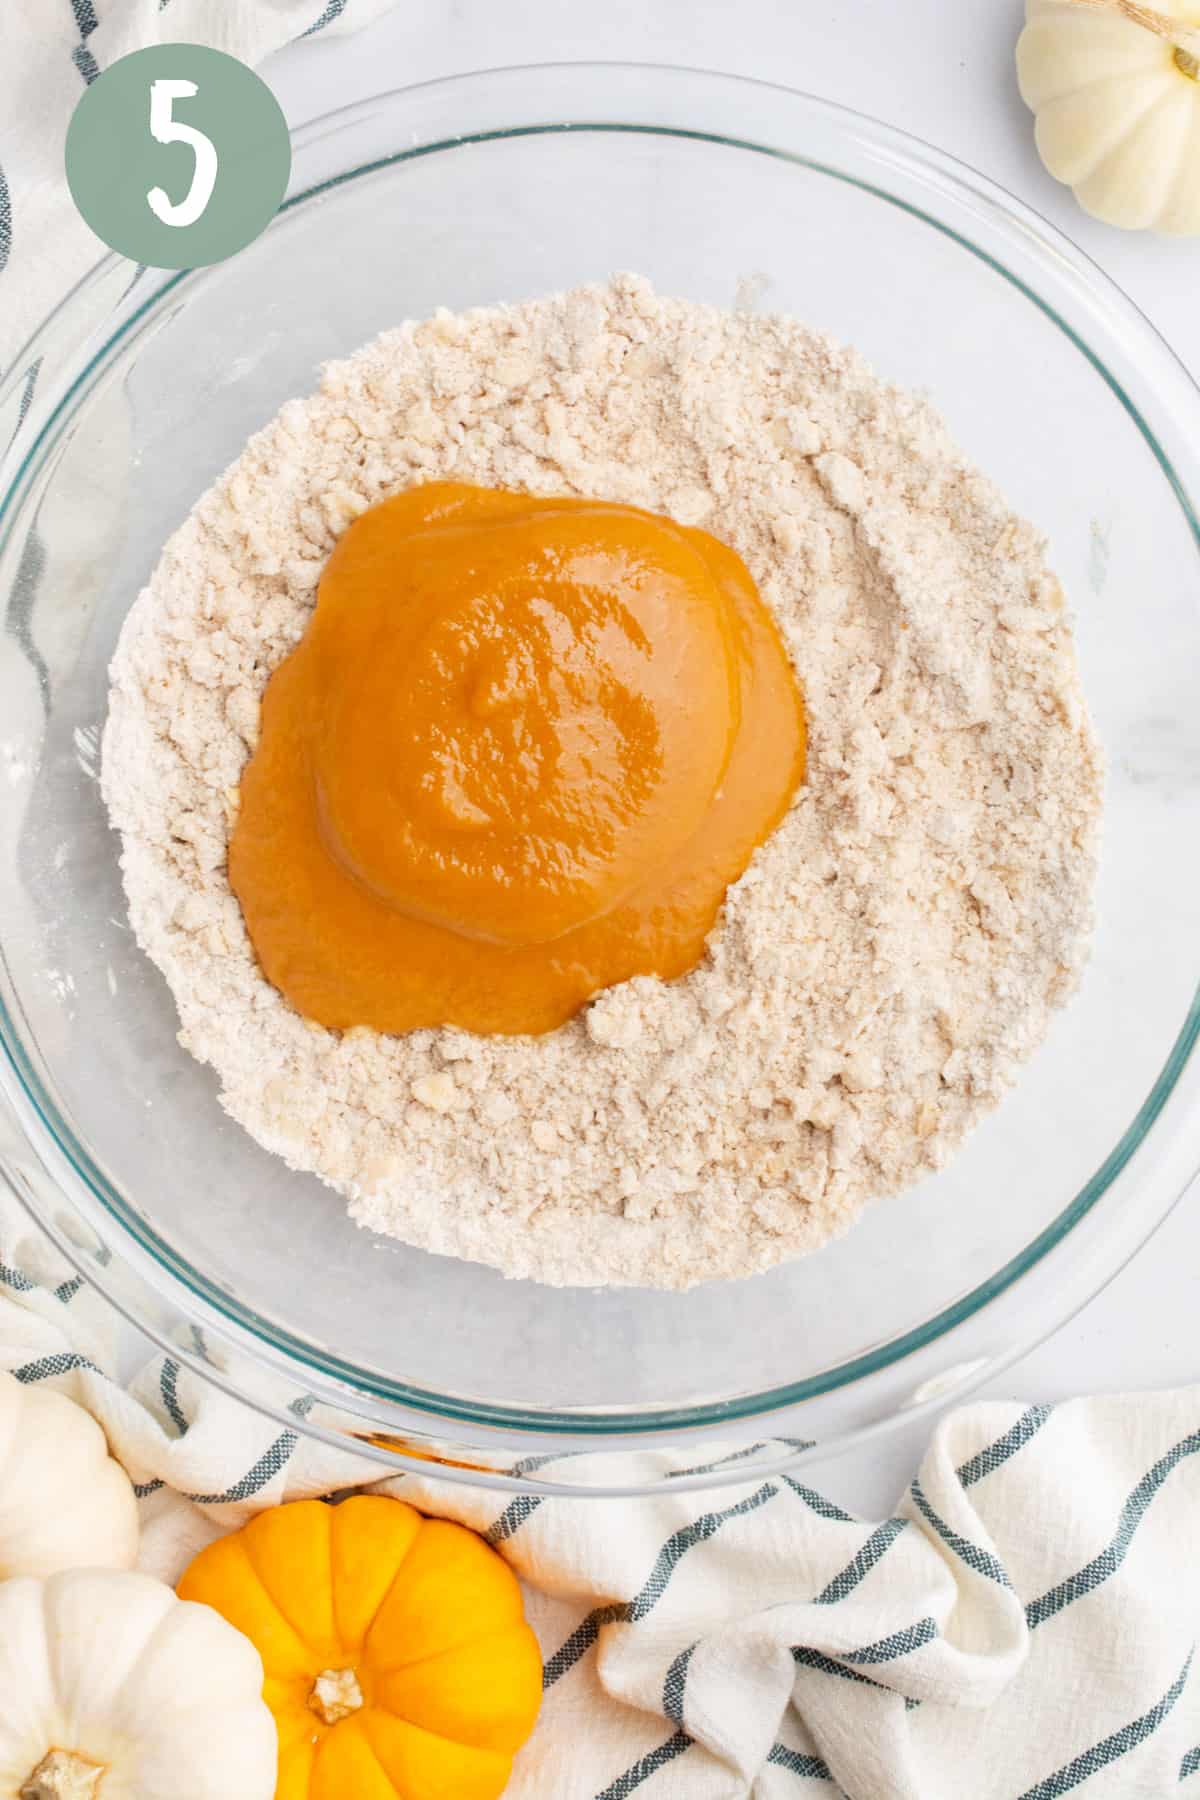 Dry ingredients and pumpkin purée in a glass bowl.